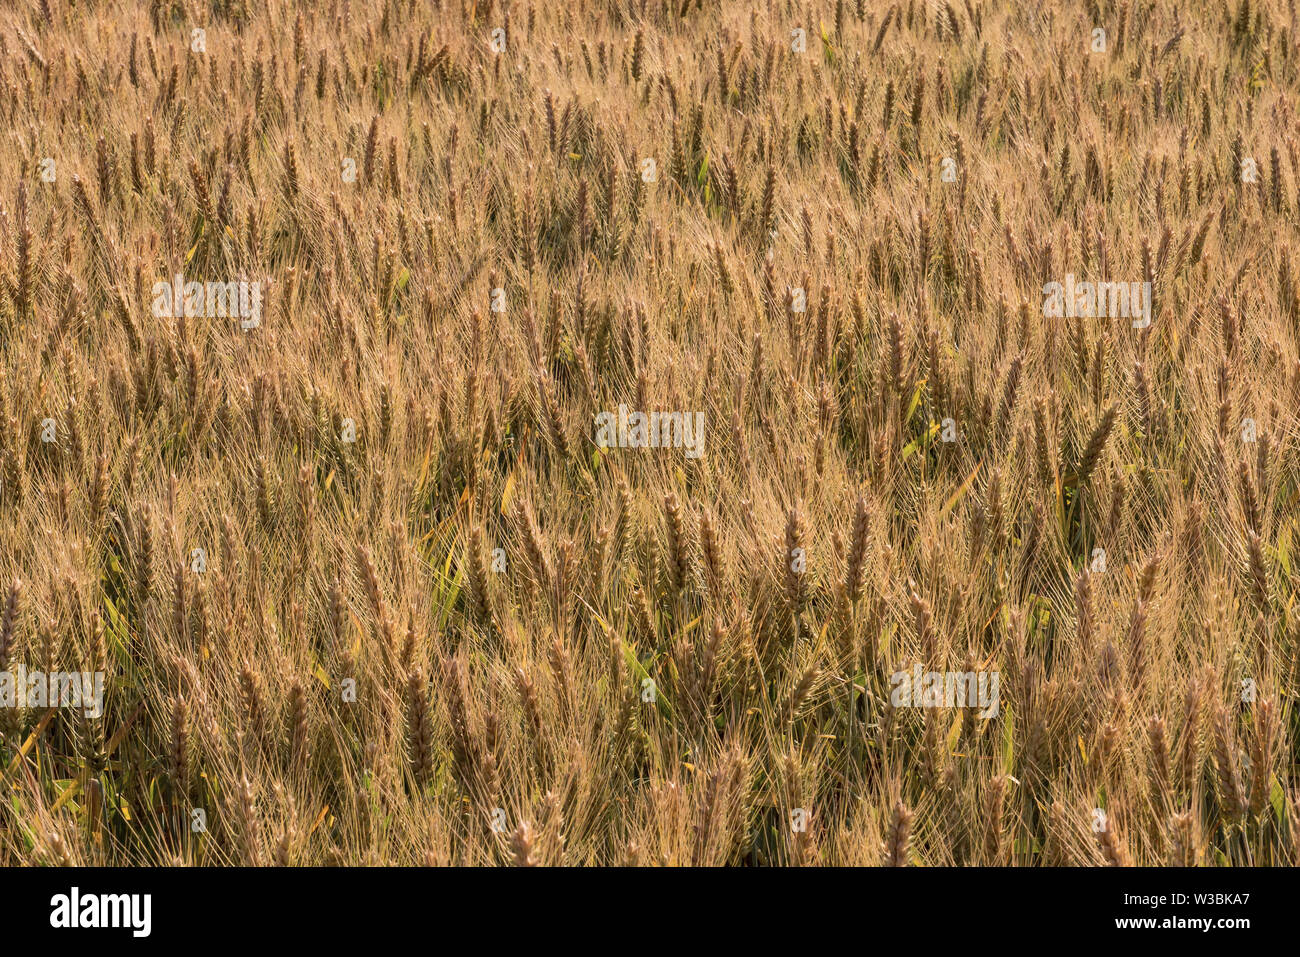 Wheat fields. Ripe wheat. It's time for harvesting. Stock Photo